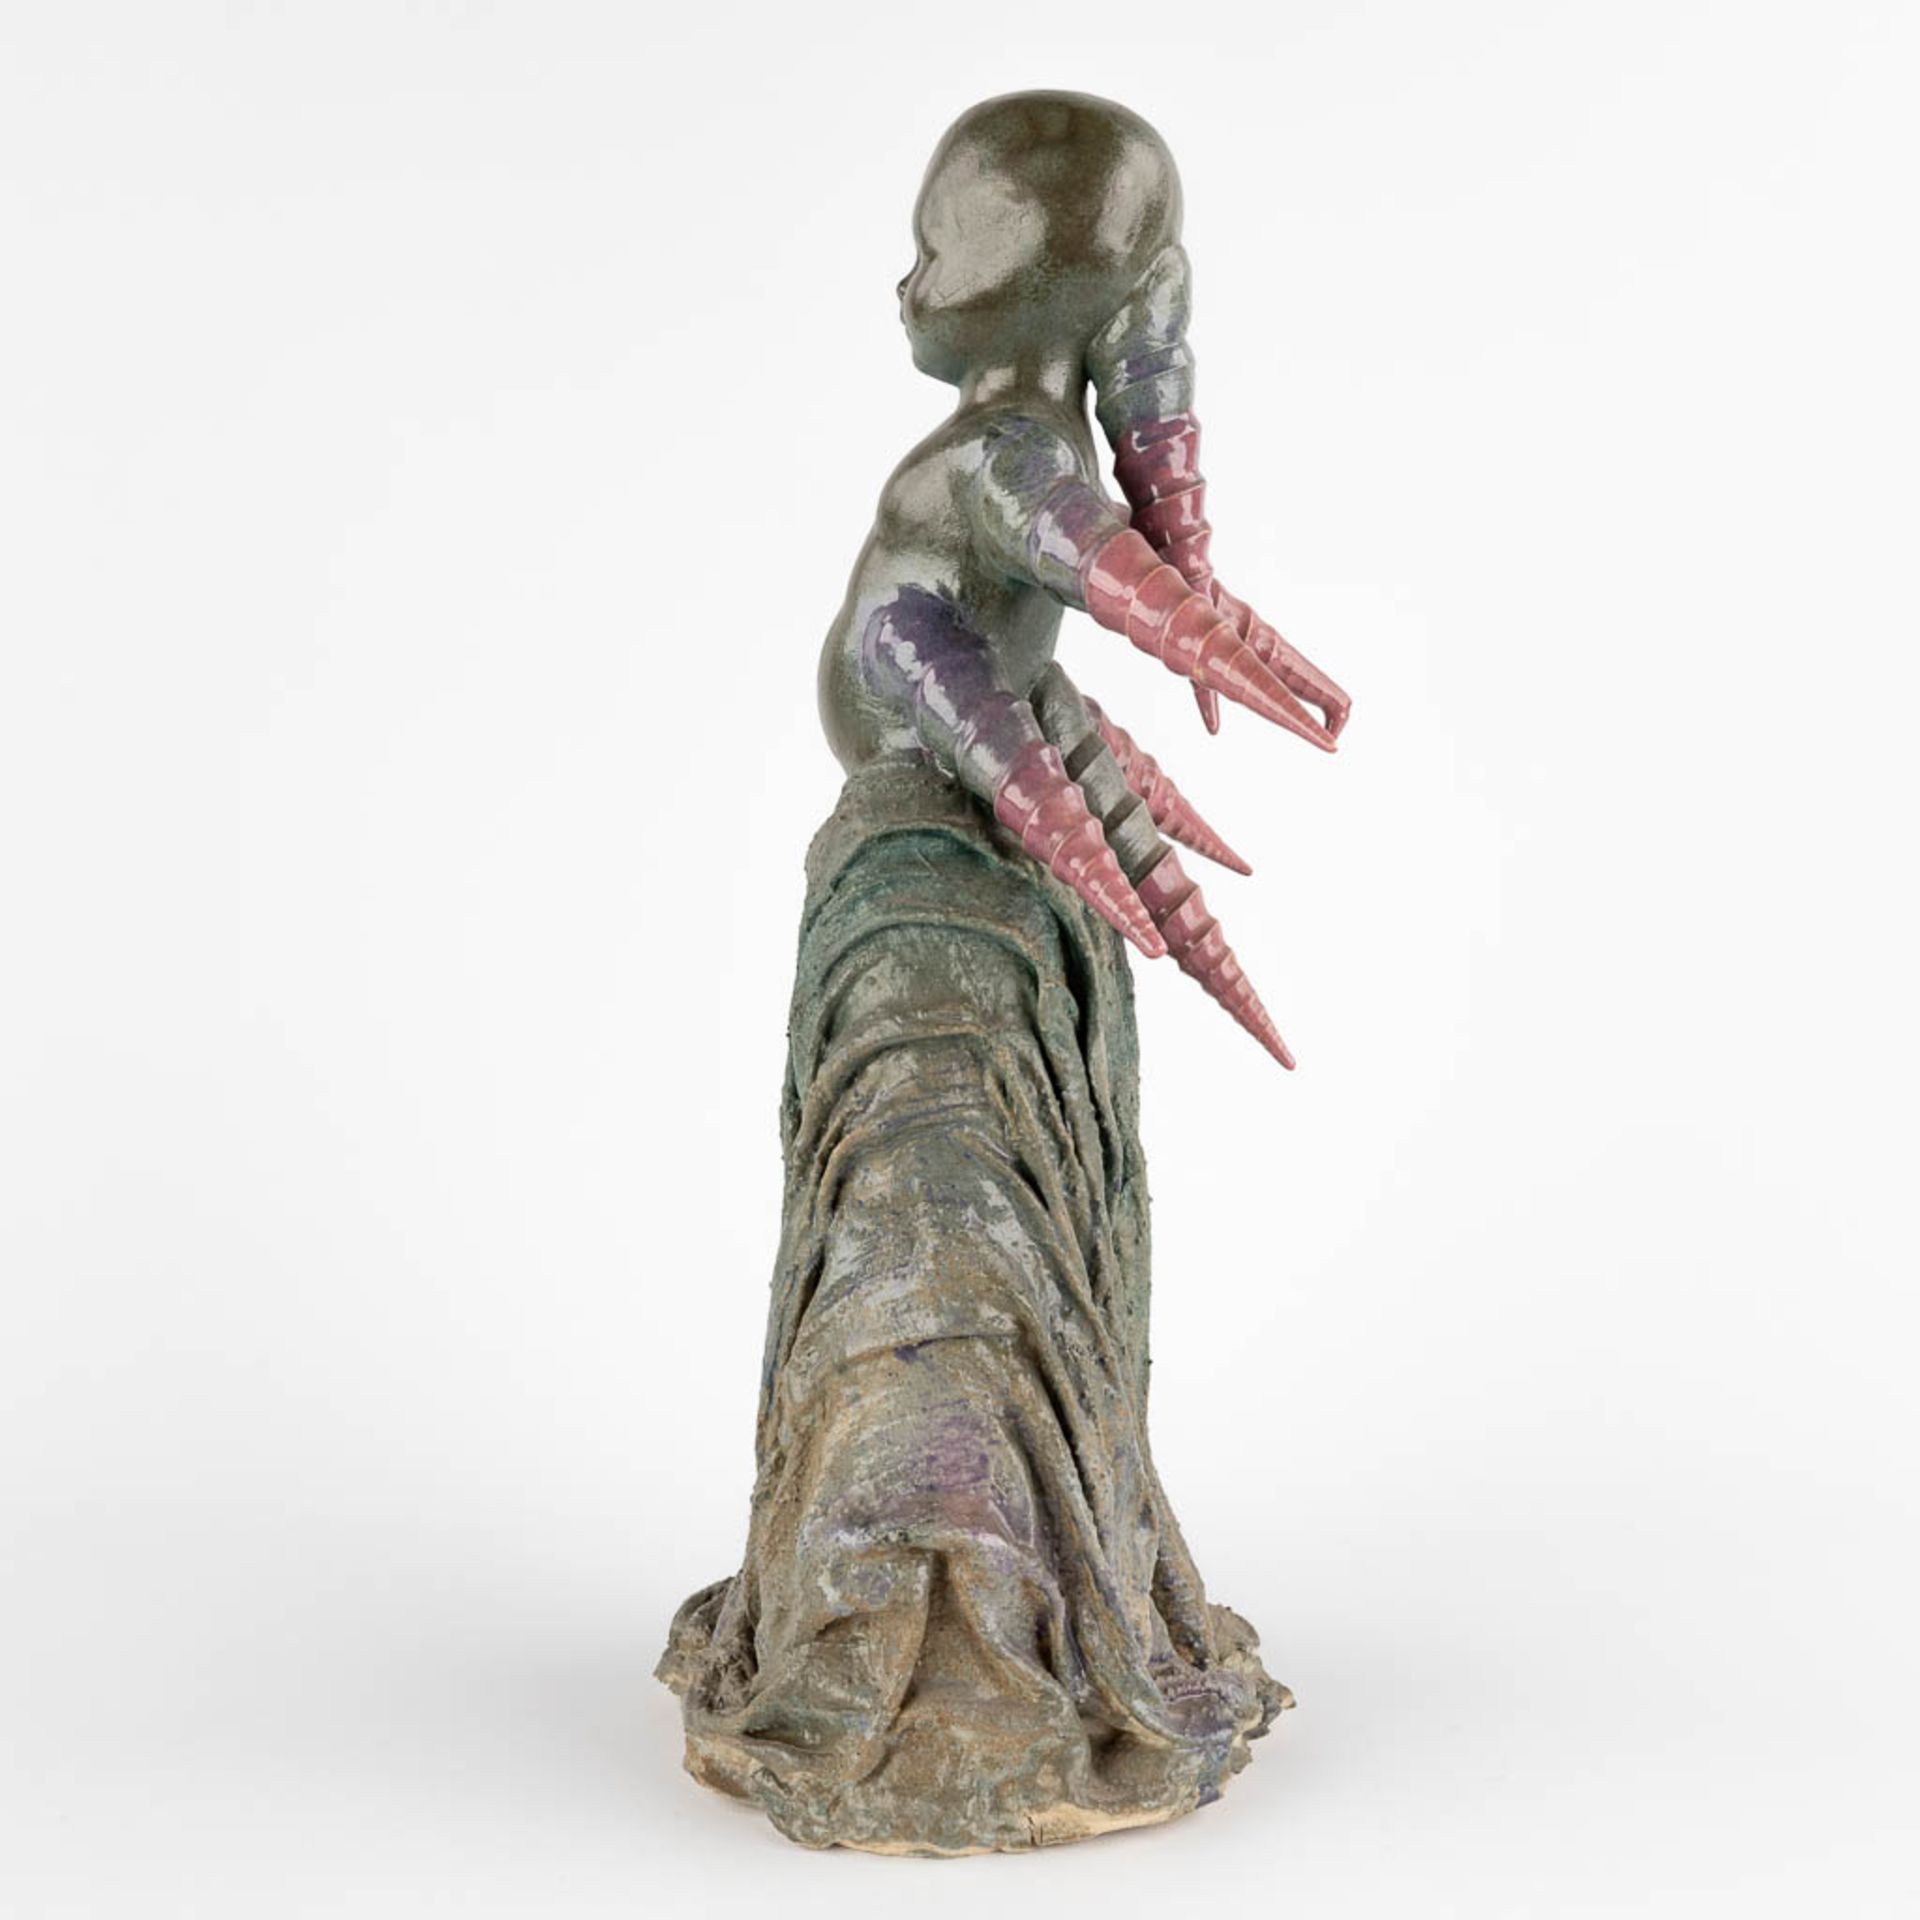 An abstract sculpture of a child with drills/seashells. 20th C. (D:16 x W:17 x H:50 cm) - Image 6 of 10